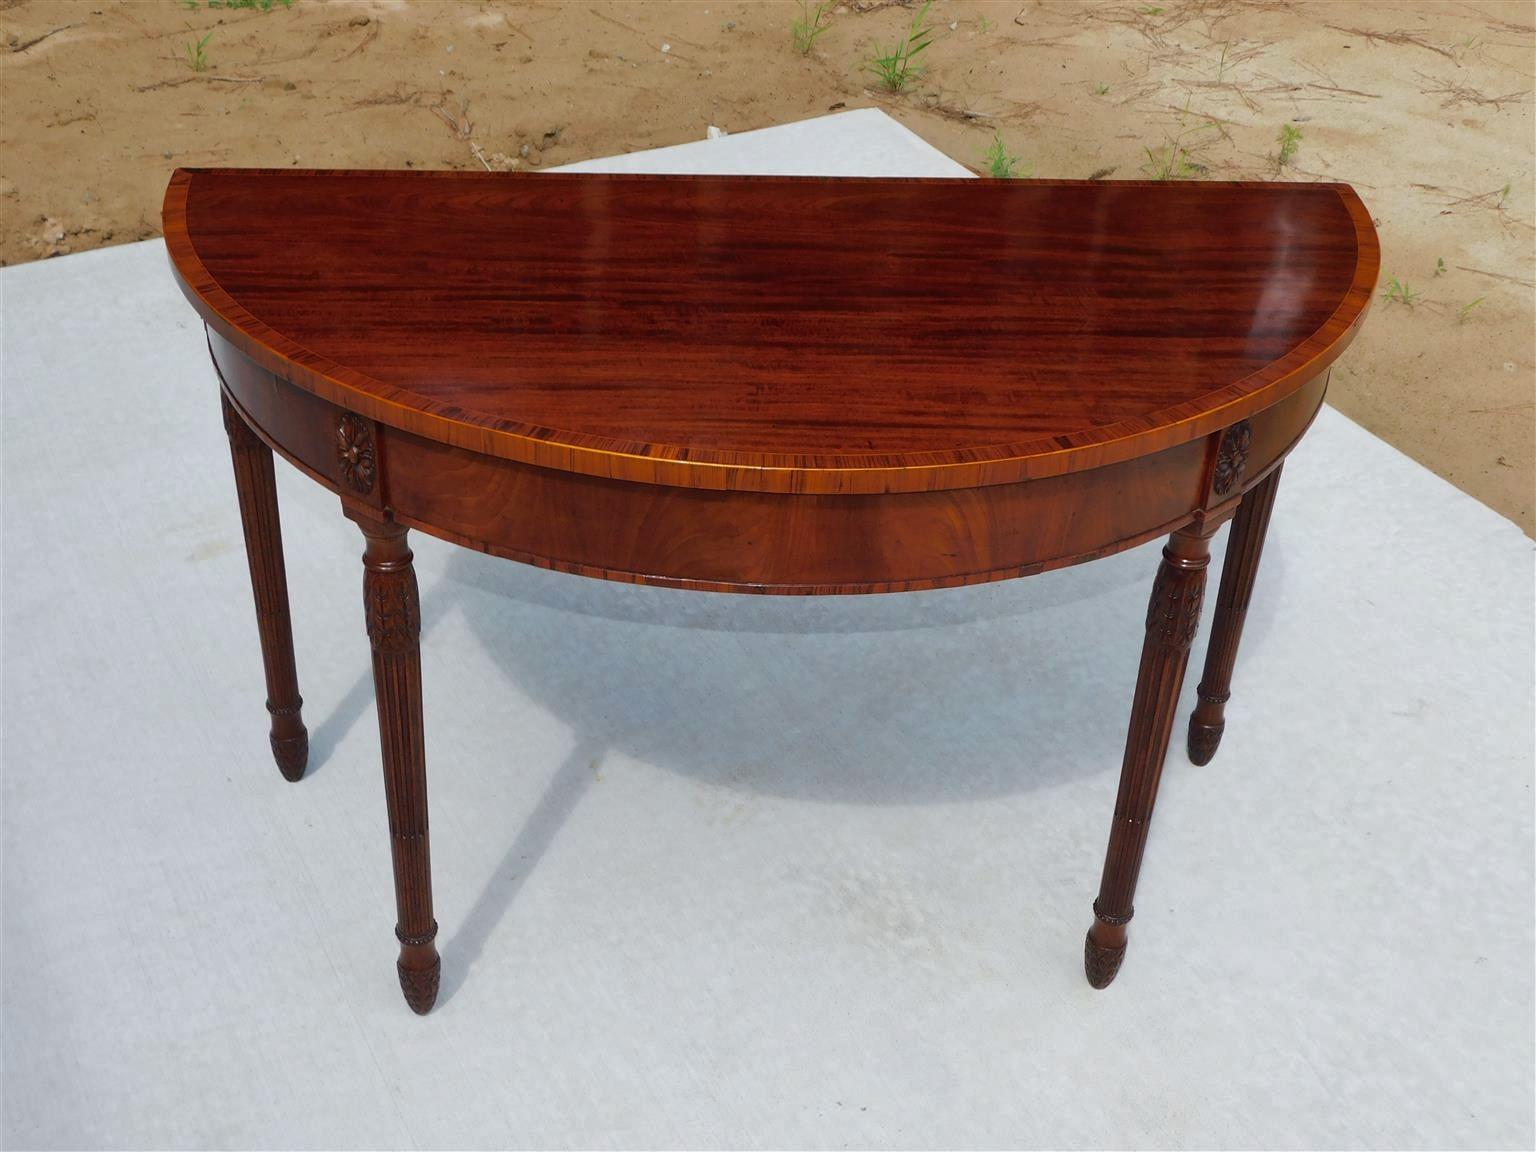 Pair of English Mahogany Demi-lune Consoles w/ Tulip Wood Cross Banding, C. 1780 For Sale 2